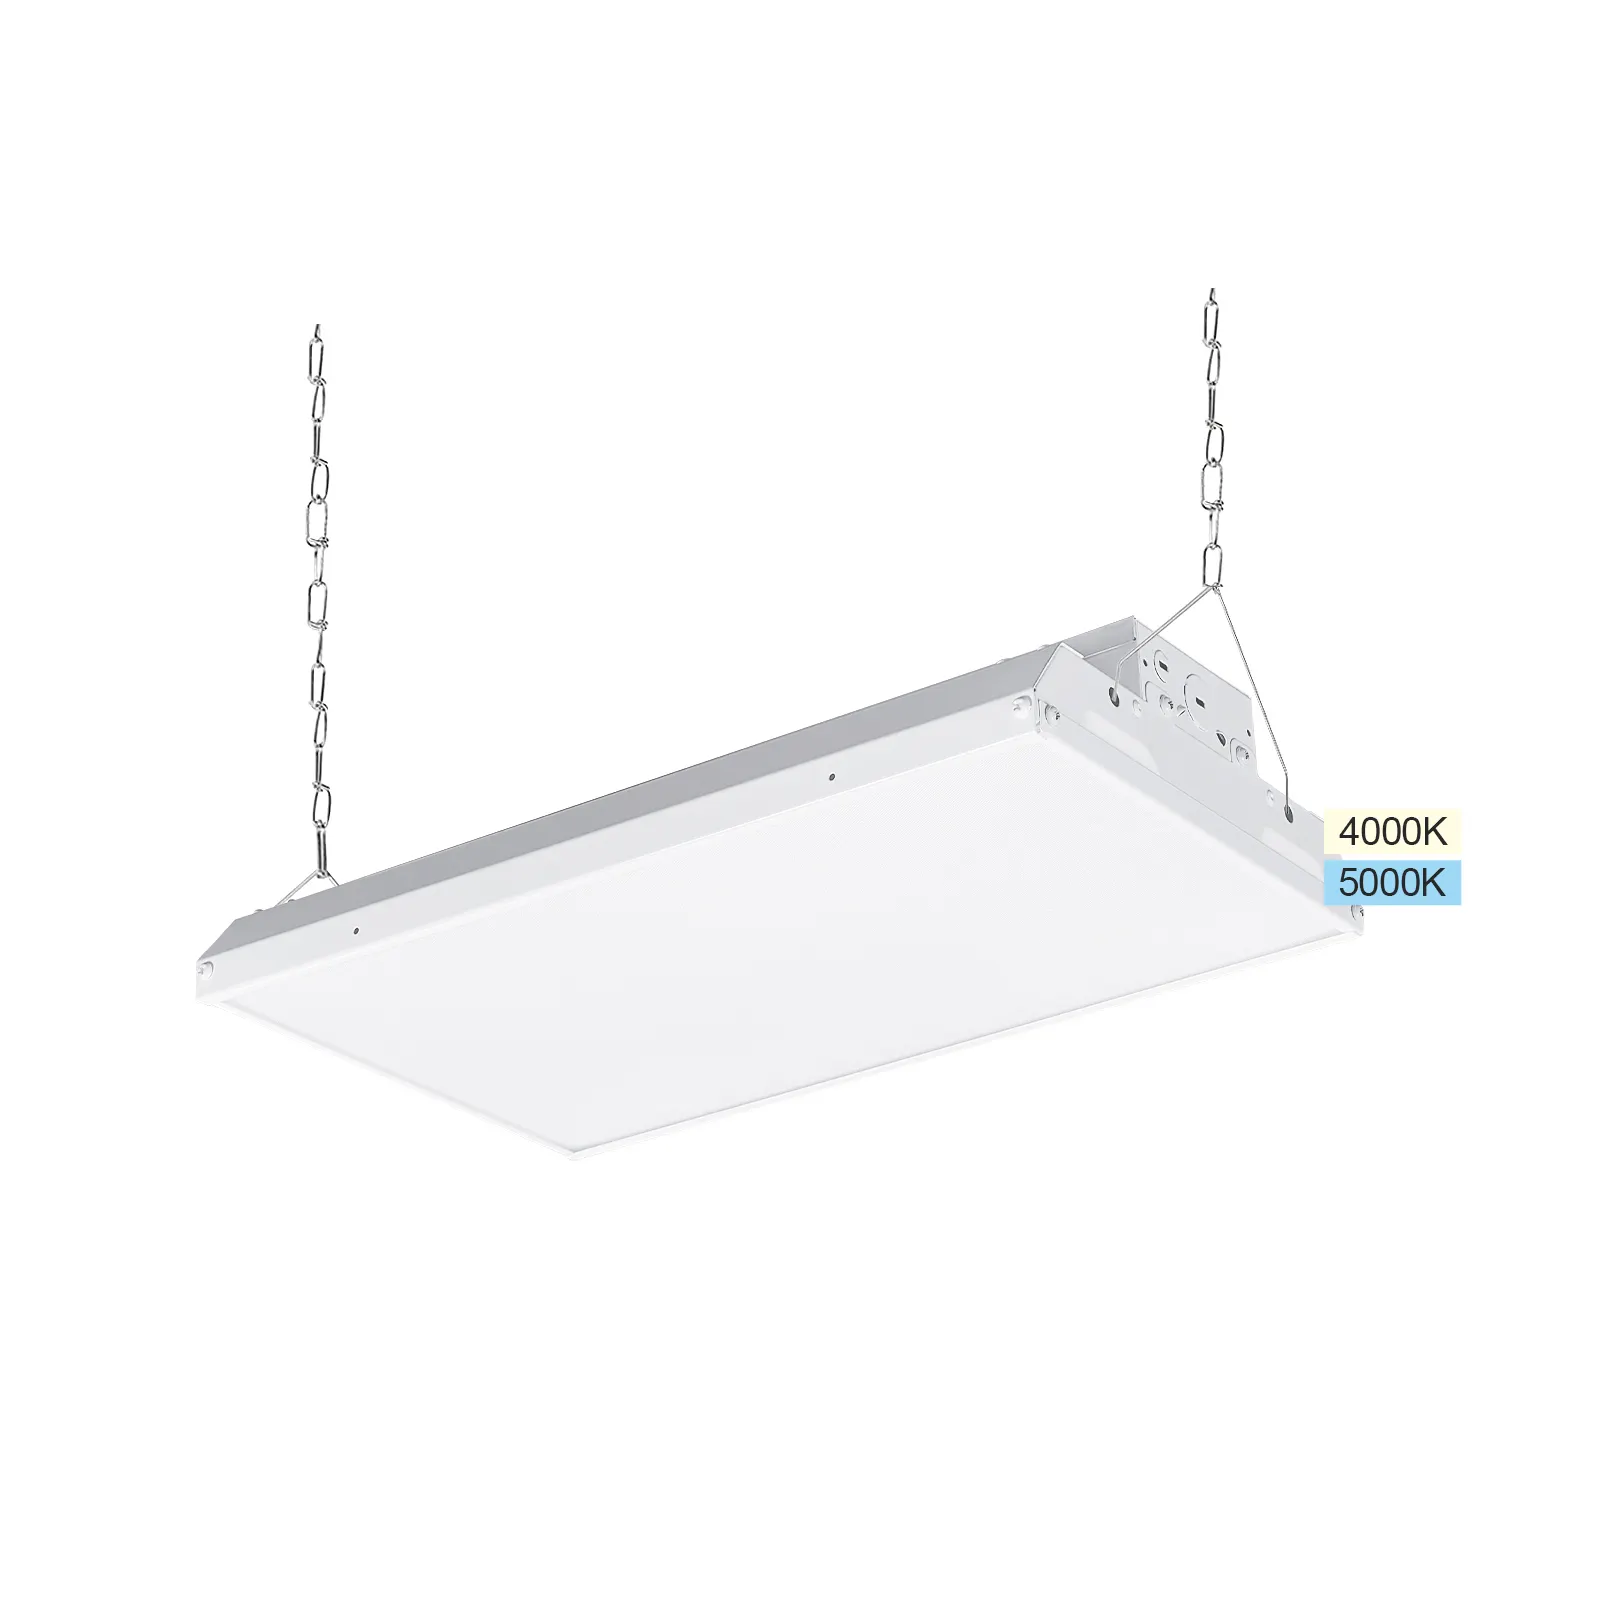 Compact Pro LED Linear High Bay 115W 17250LM, 4000K/5000K CCT Selectable High Bay LED Shop Lights